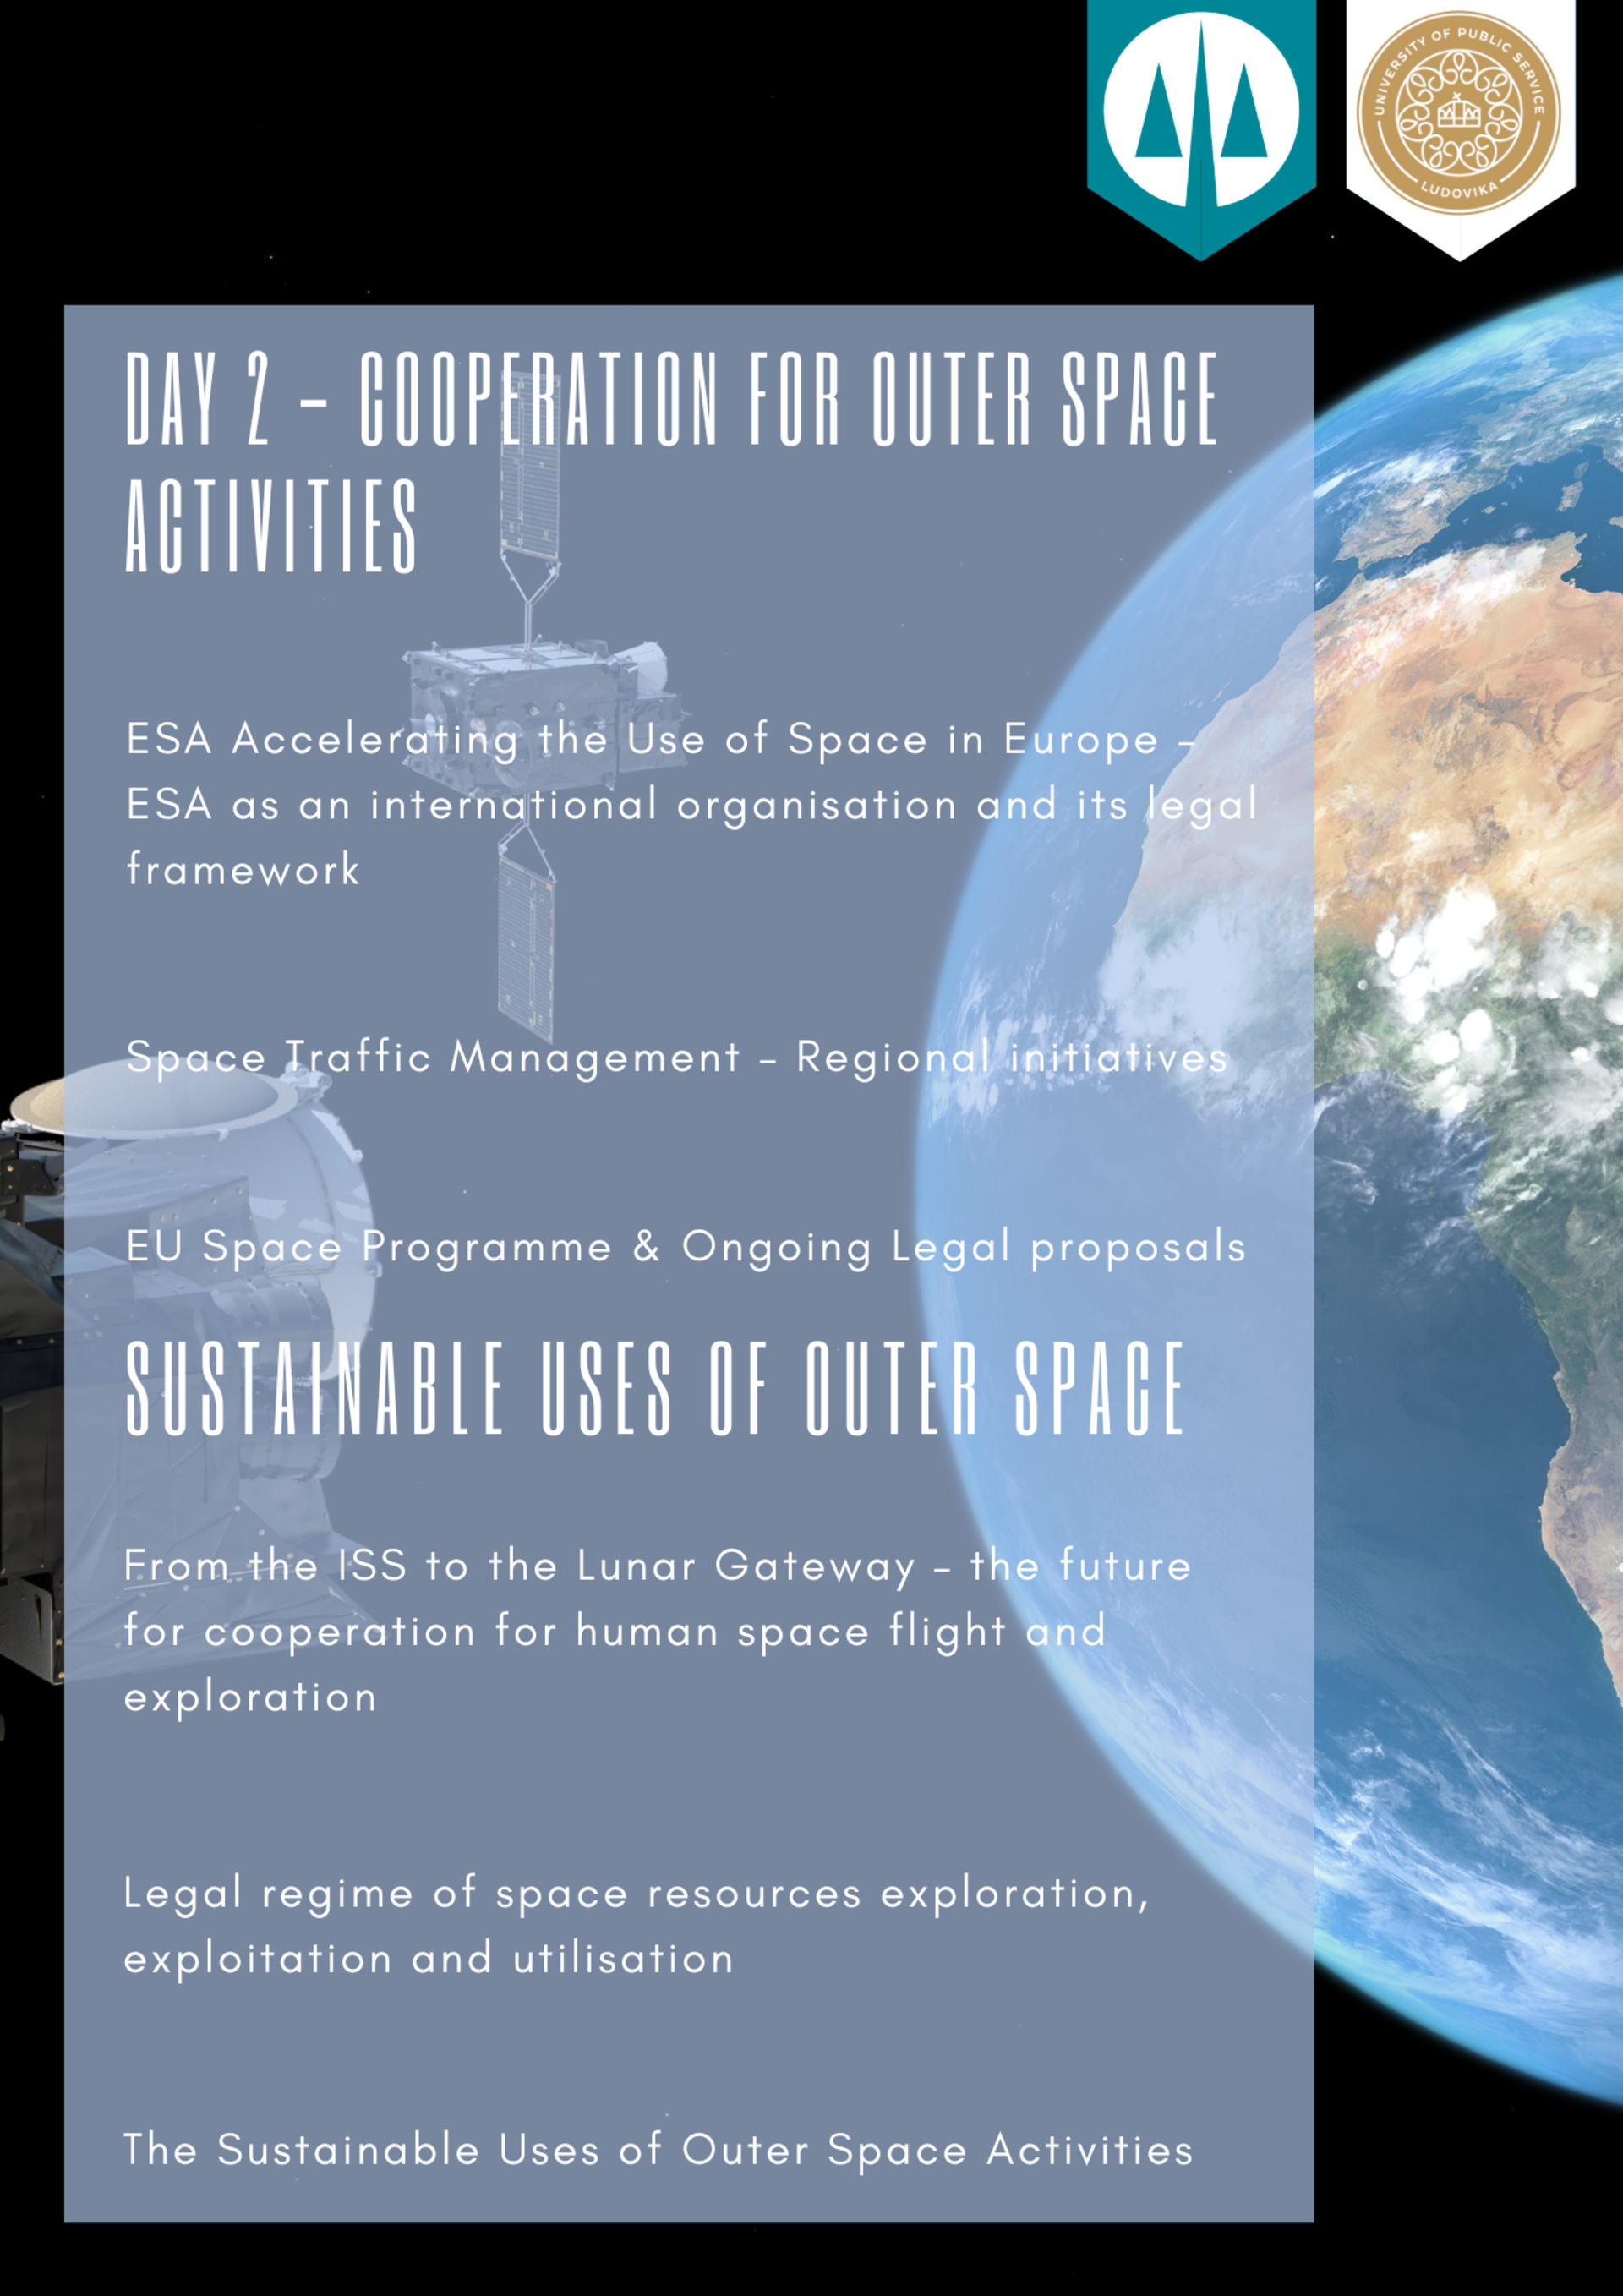 ESA/ECSL Summer Course on Space Law and Policy - Draft Programme 2